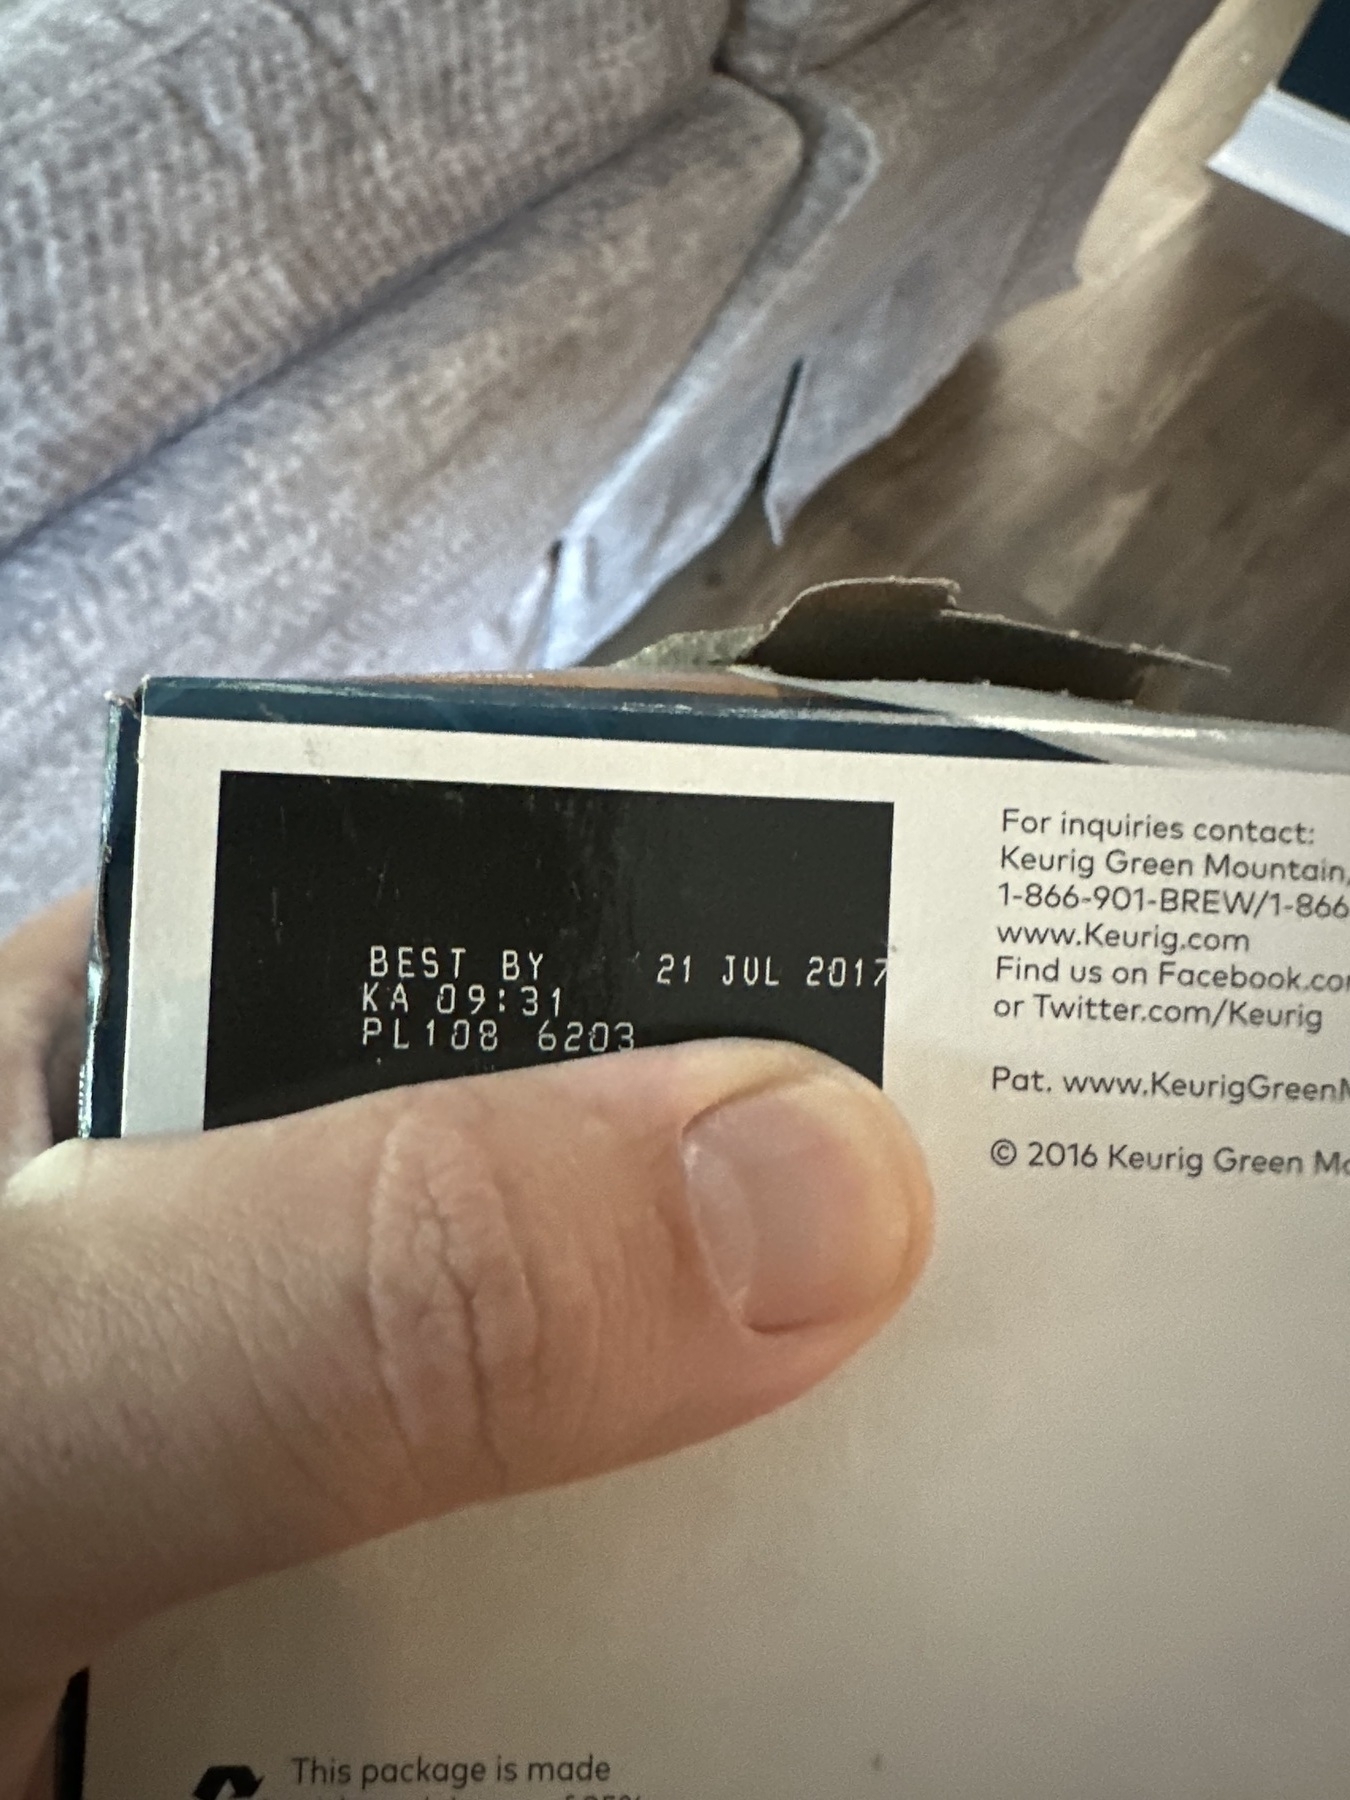 Back of a box showing expiration of July 21st, 2017